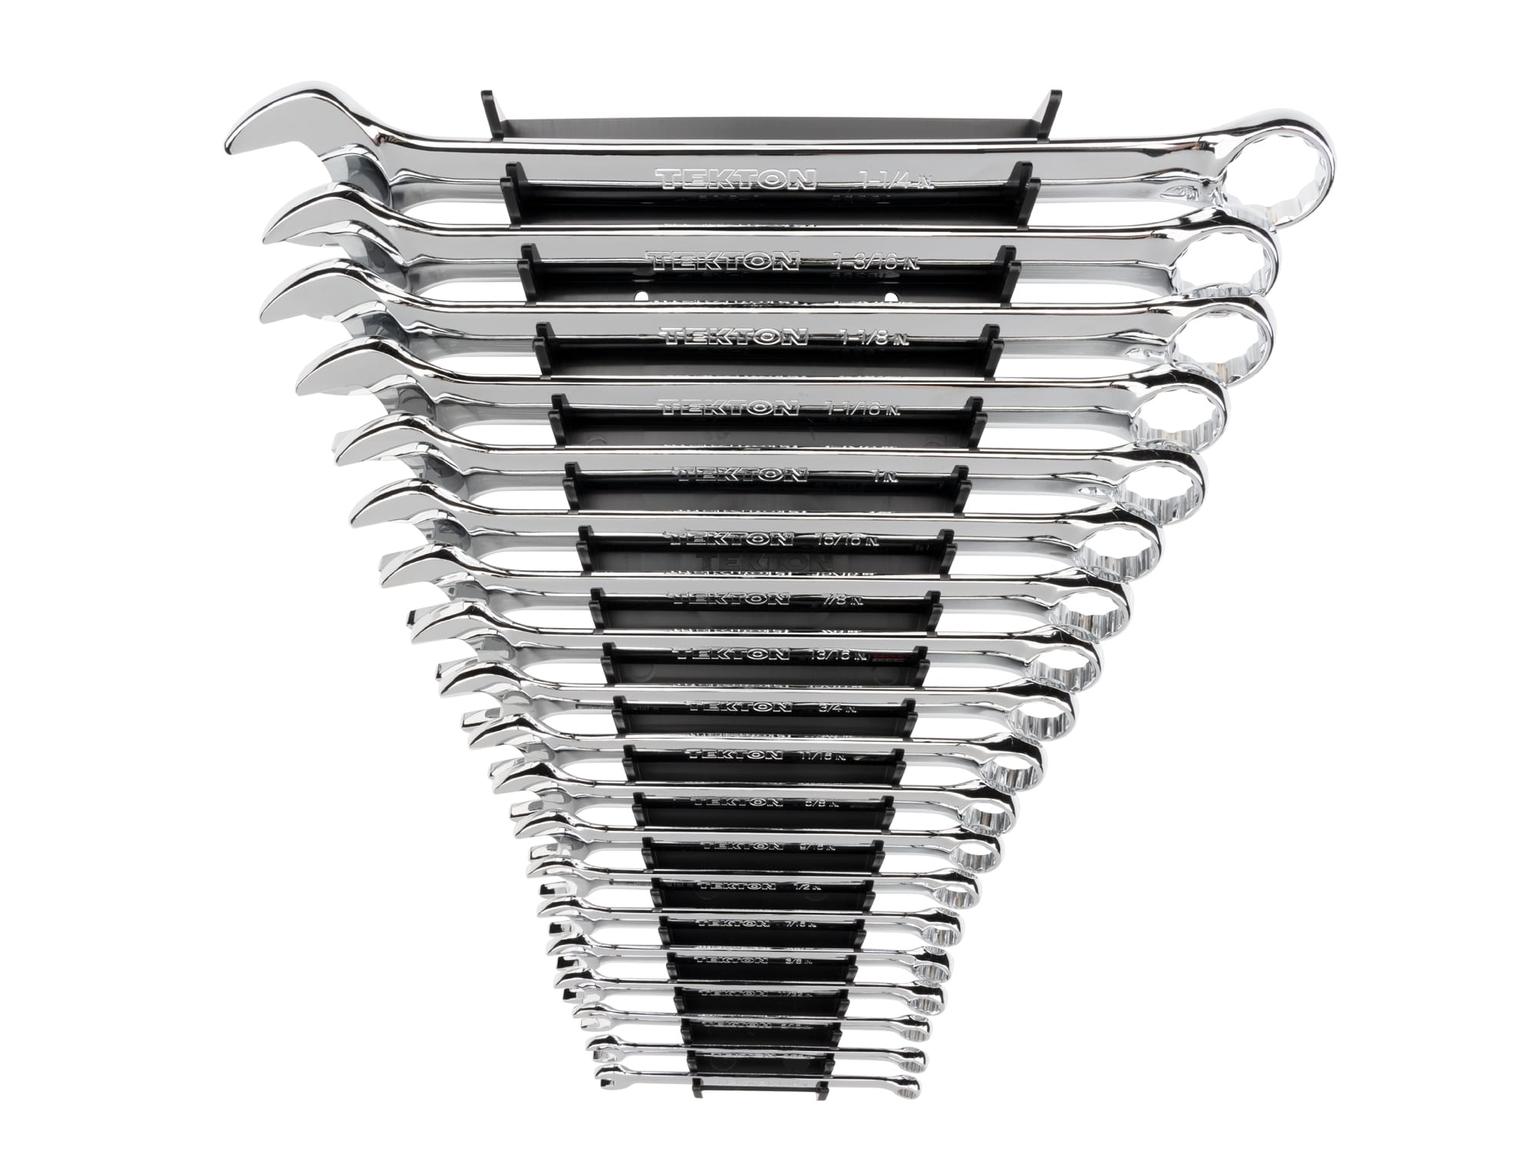 TEKTON WCB91102-T Combination Wrench Set with Rack, 19-Piece (1/4 - 1-1/4 in.)